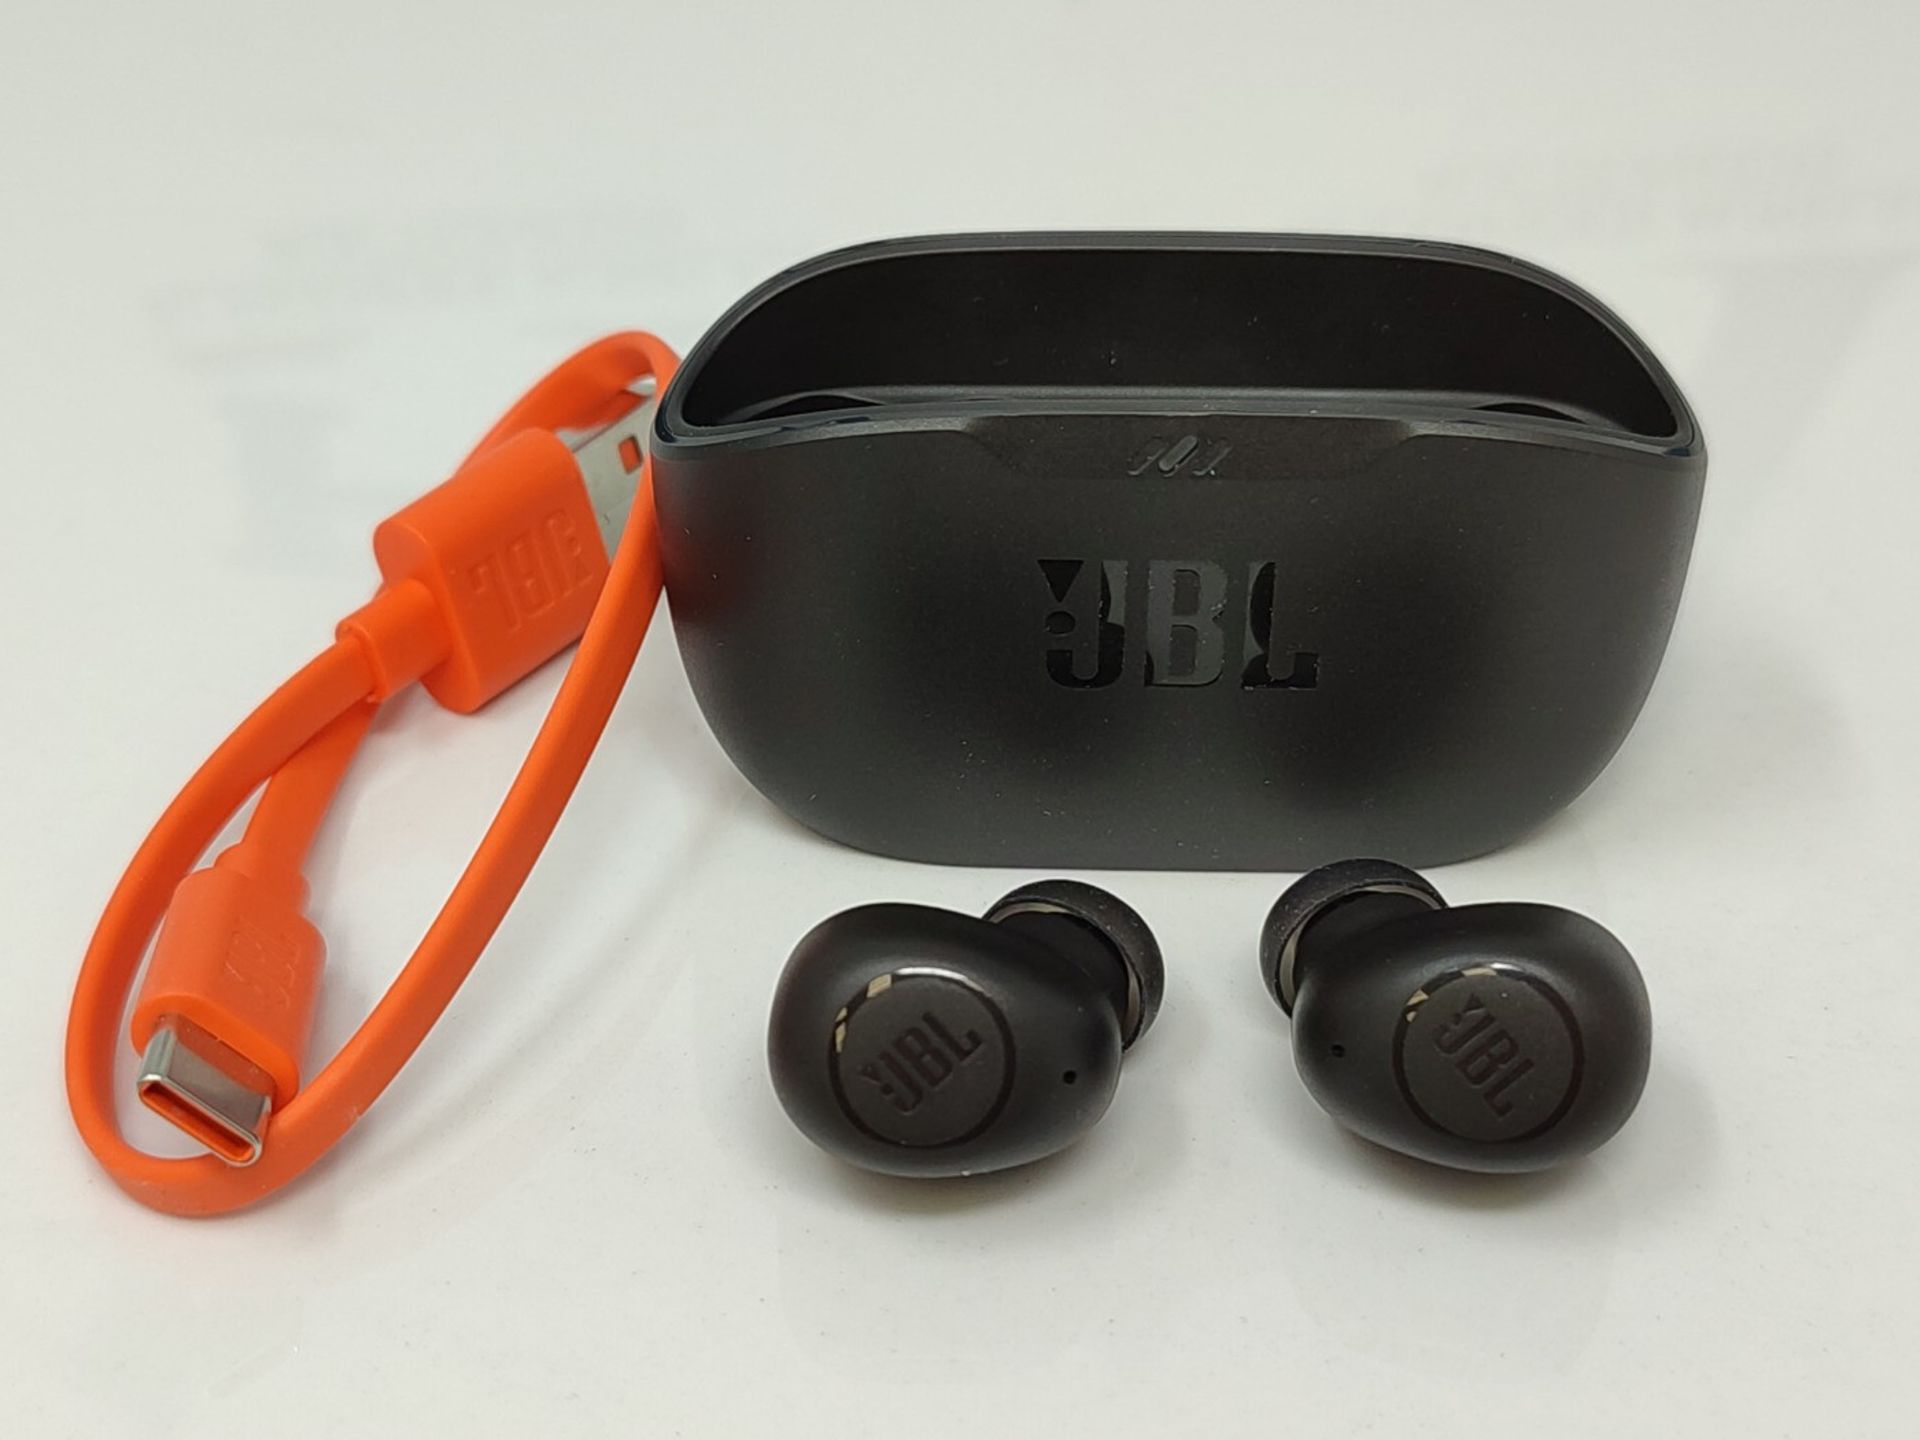 JBL Wave Buds - Wireless In-Ear Earbuds with IP54 and IPX2 waterproofing - Powerful ba - Image 6 of 6